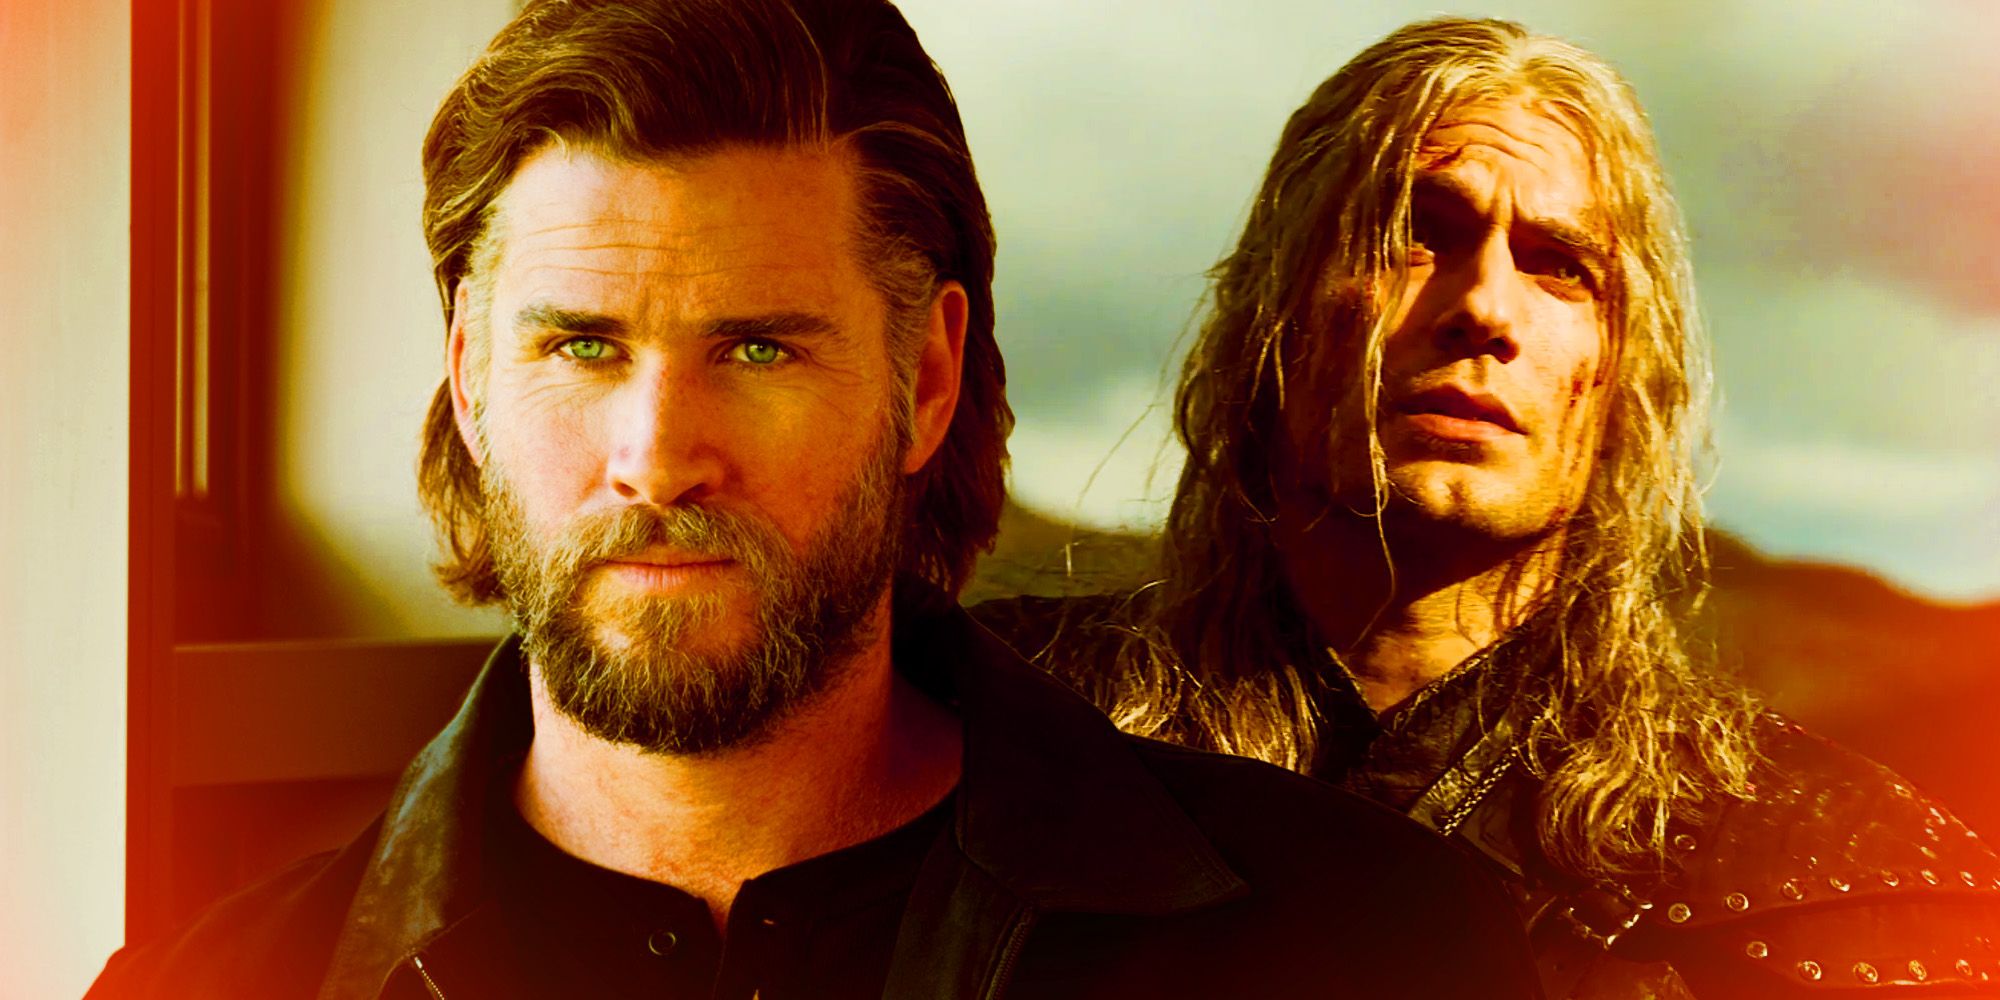 The Witcher Liam Hemsworth next to Henry Cavill as Geralt of Rivia